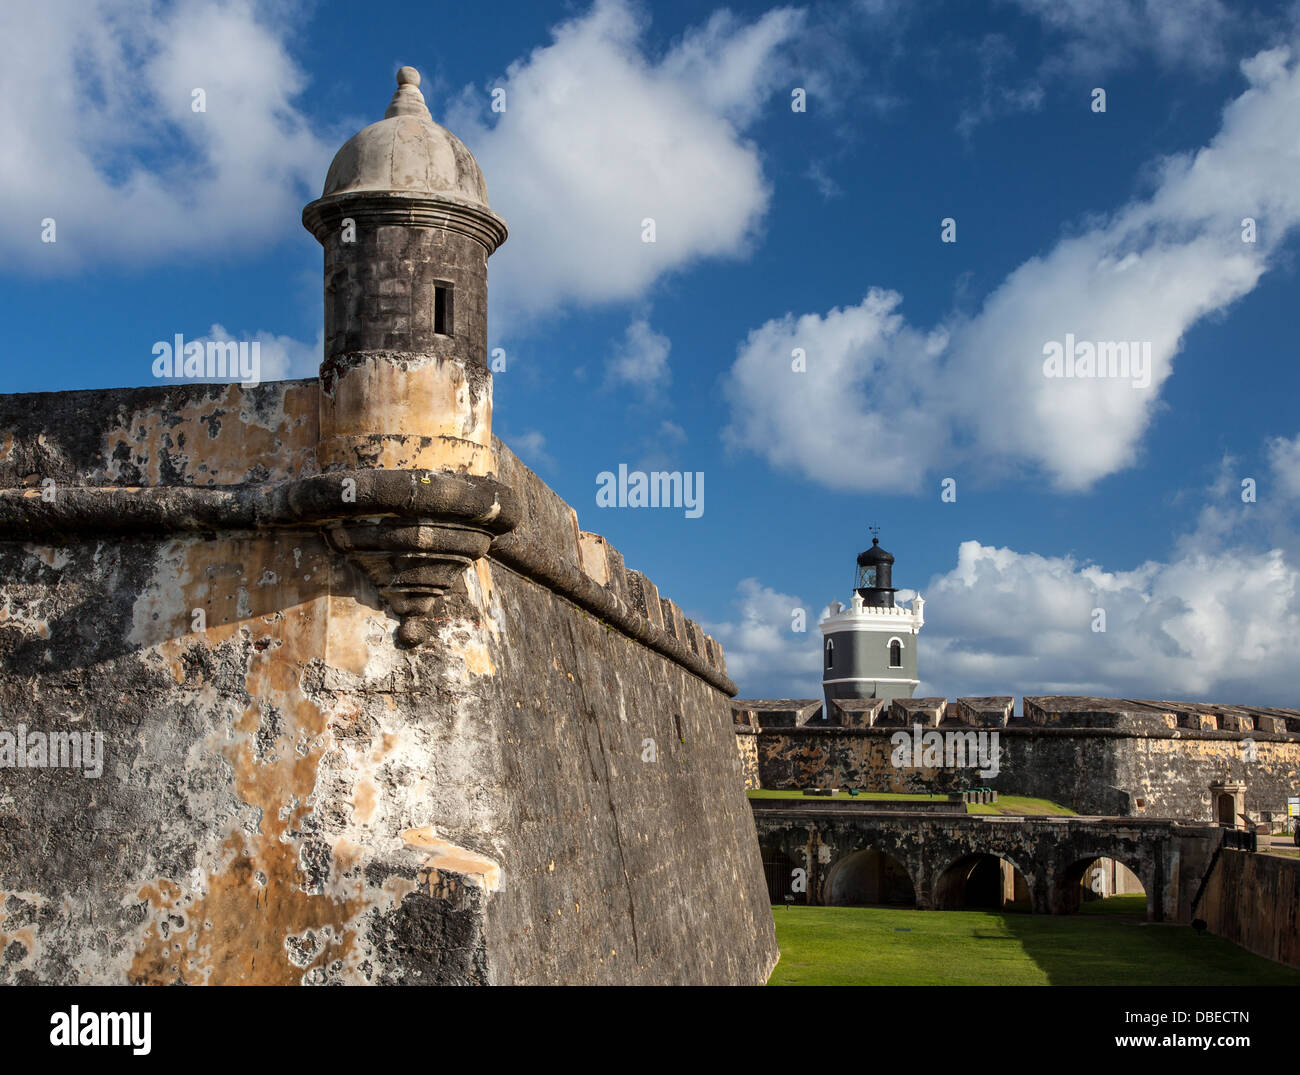 Turret and Lighthouse of El Morro Fort, San Juan, Puerto Rico. Stock Photo